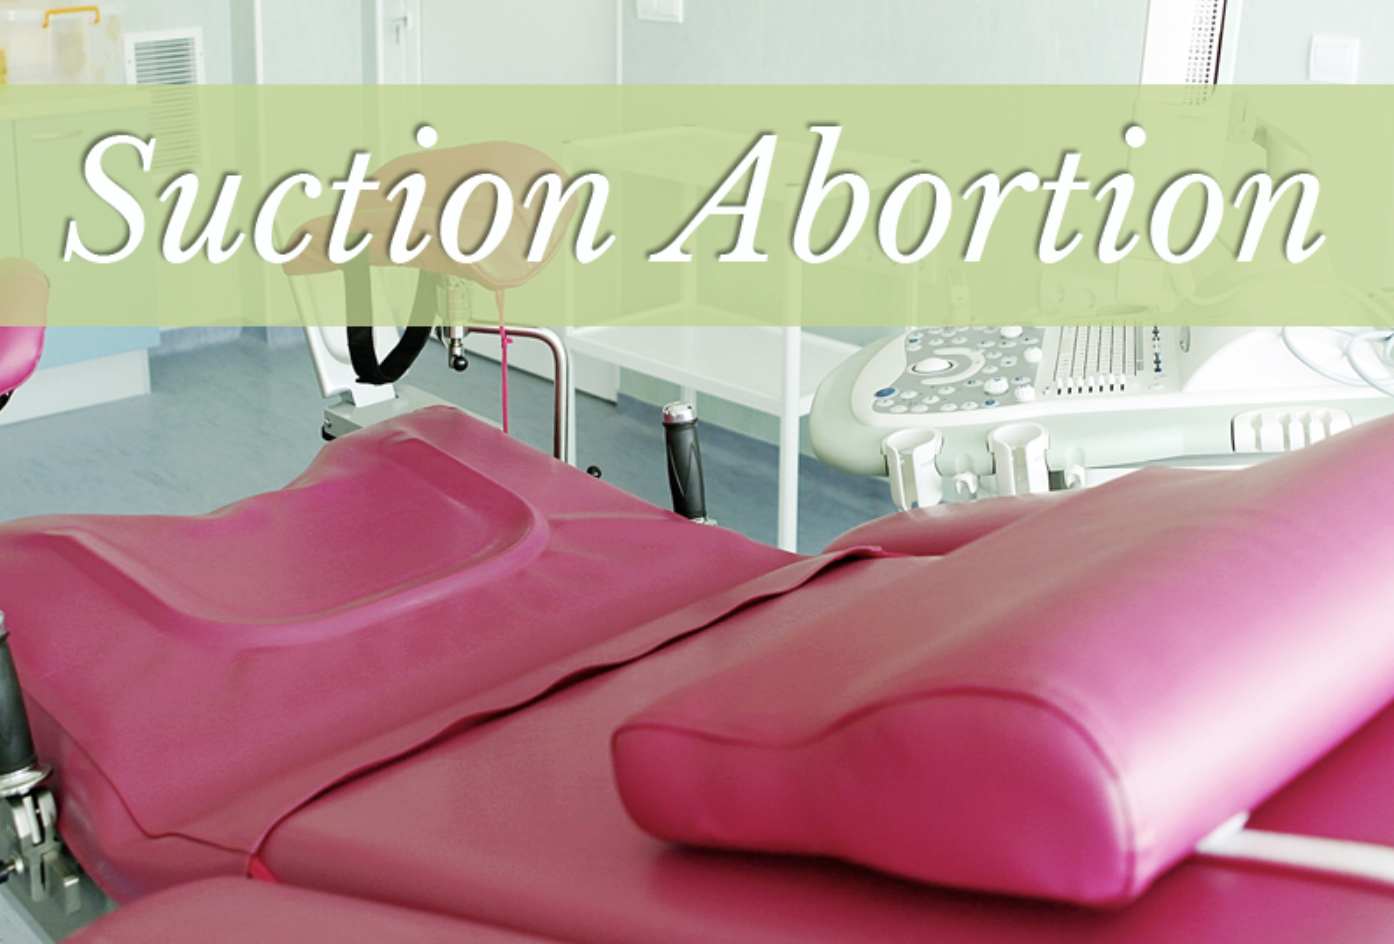 Surgical abortions that happen within the first 12-14 weeks since the last missed period (LMP), are typically vacuum aspirations, or suction abortions.